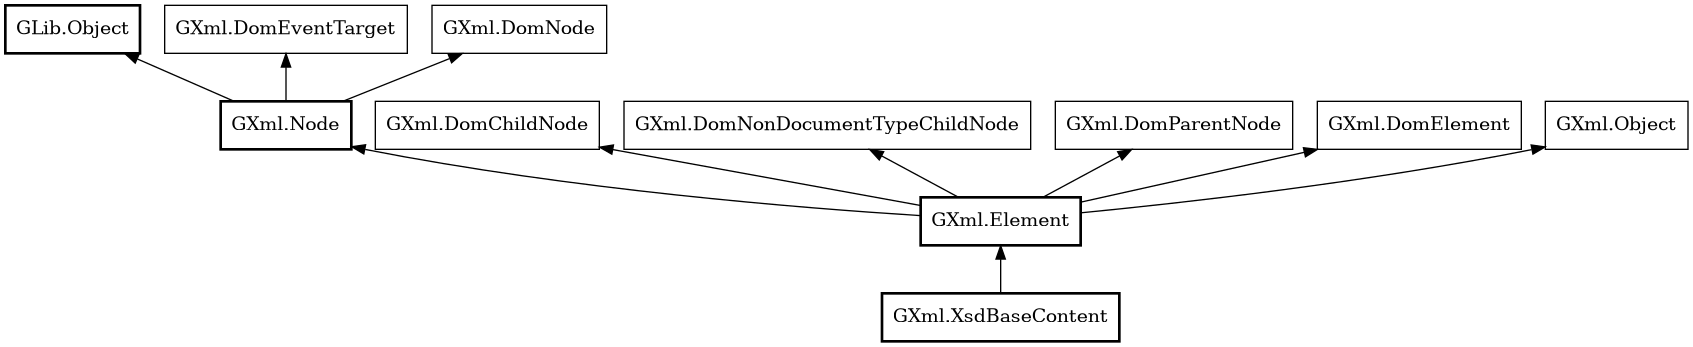 Object hierarchy for XsdBaseContent